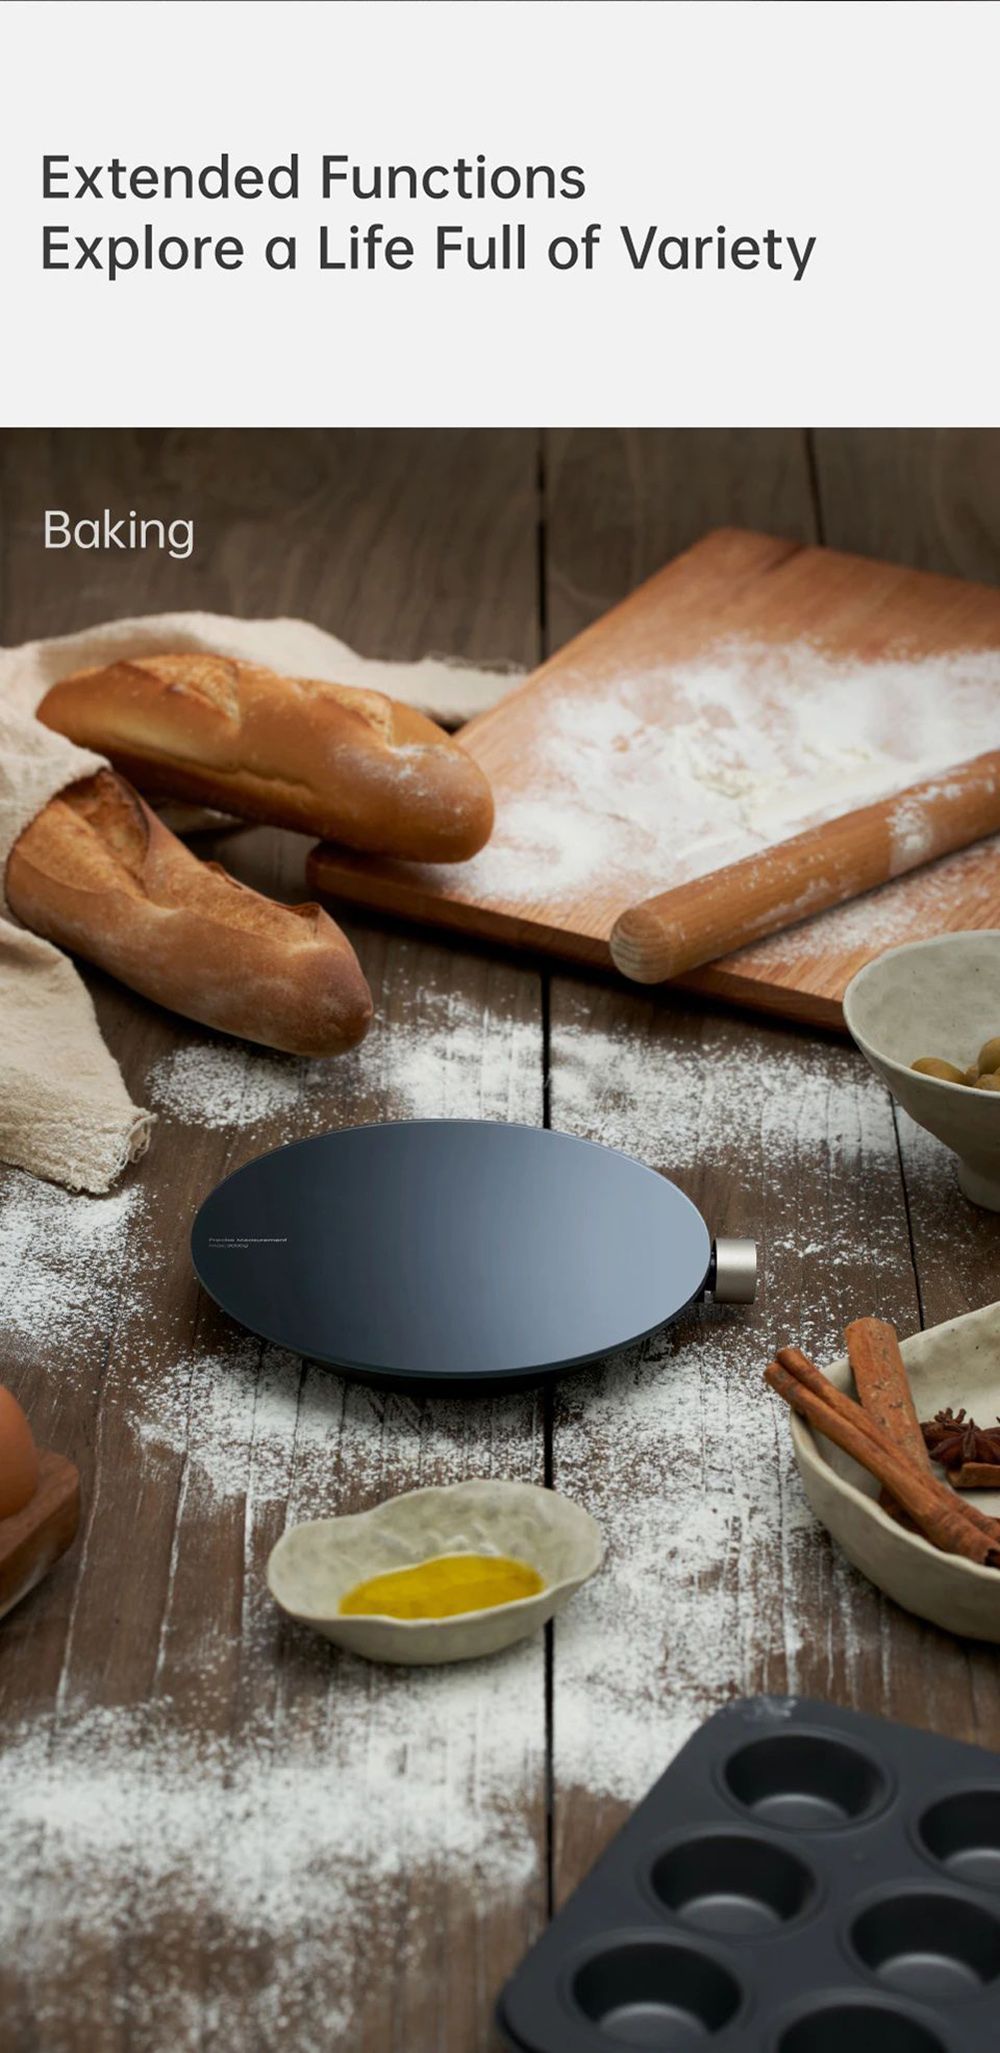 HOTO Smart Bluetooth Electronic Kitchen Scale Mijia APP Control 1-3000g Weighing Range with 0.1g High Precision Sensor